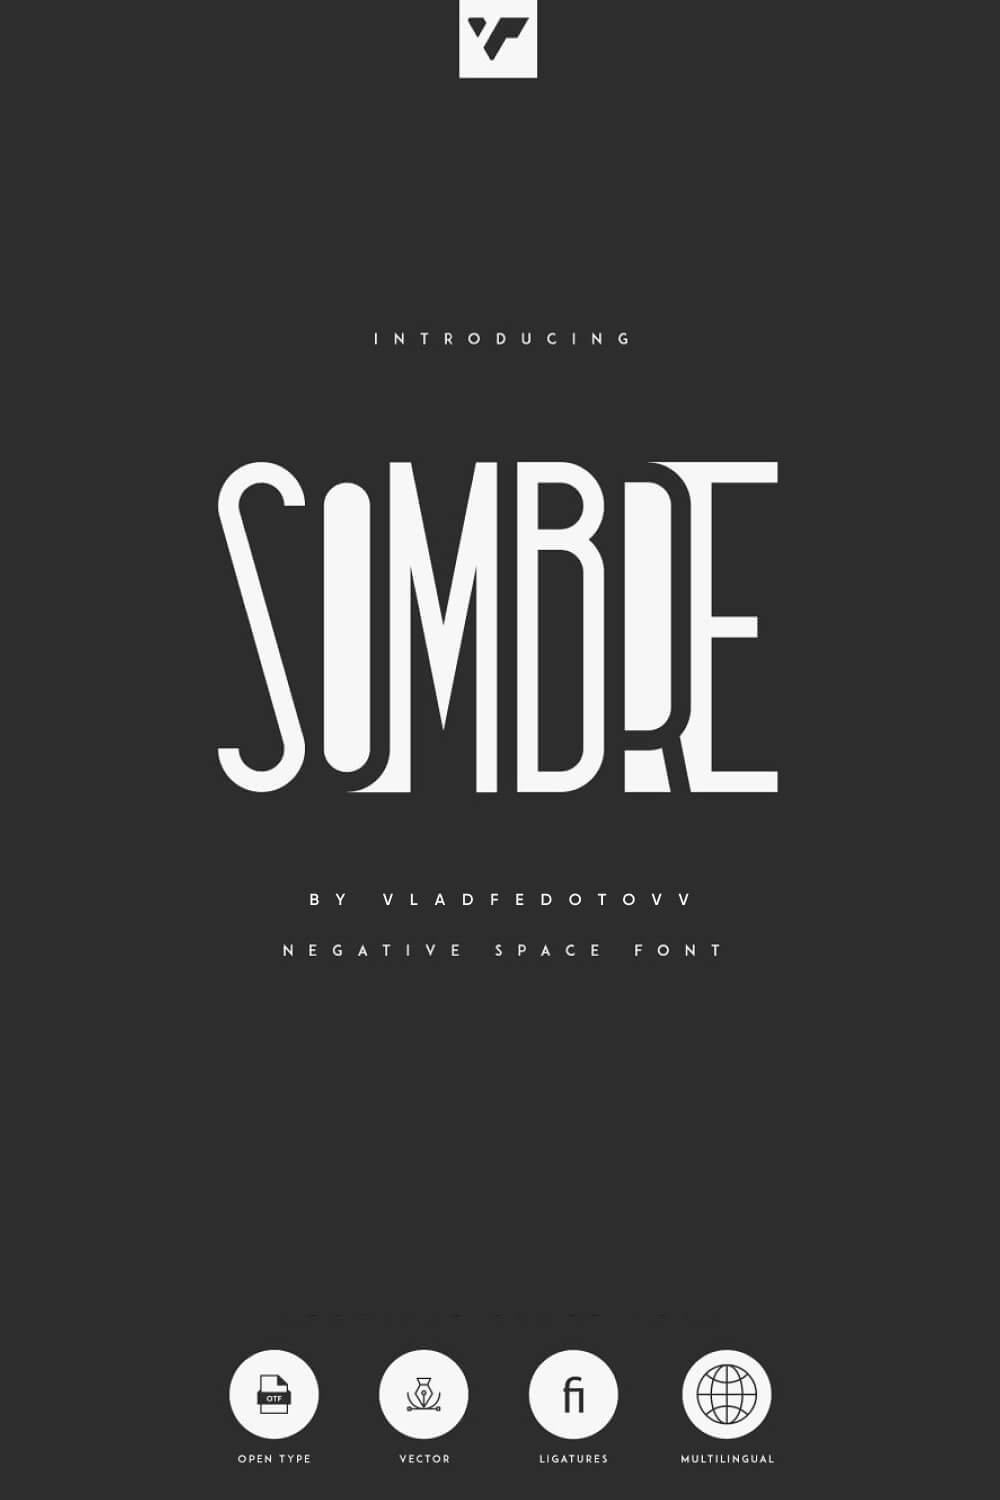 Introducing Sombre - stretched negative space font.